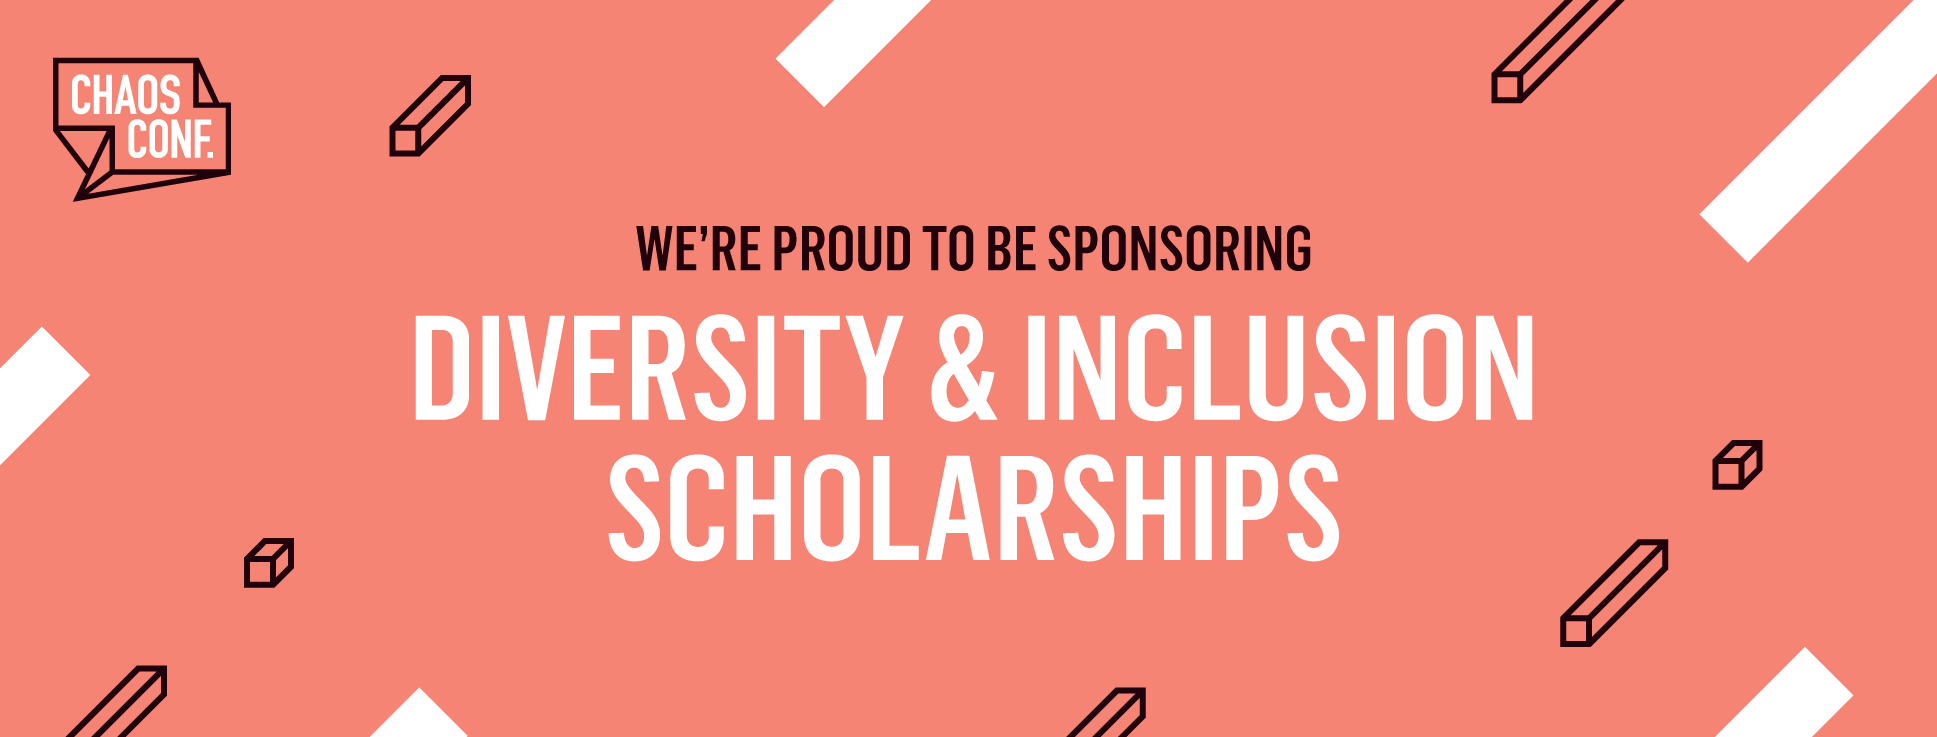 Diversity Sponsorship for Chaos Conf 2019!